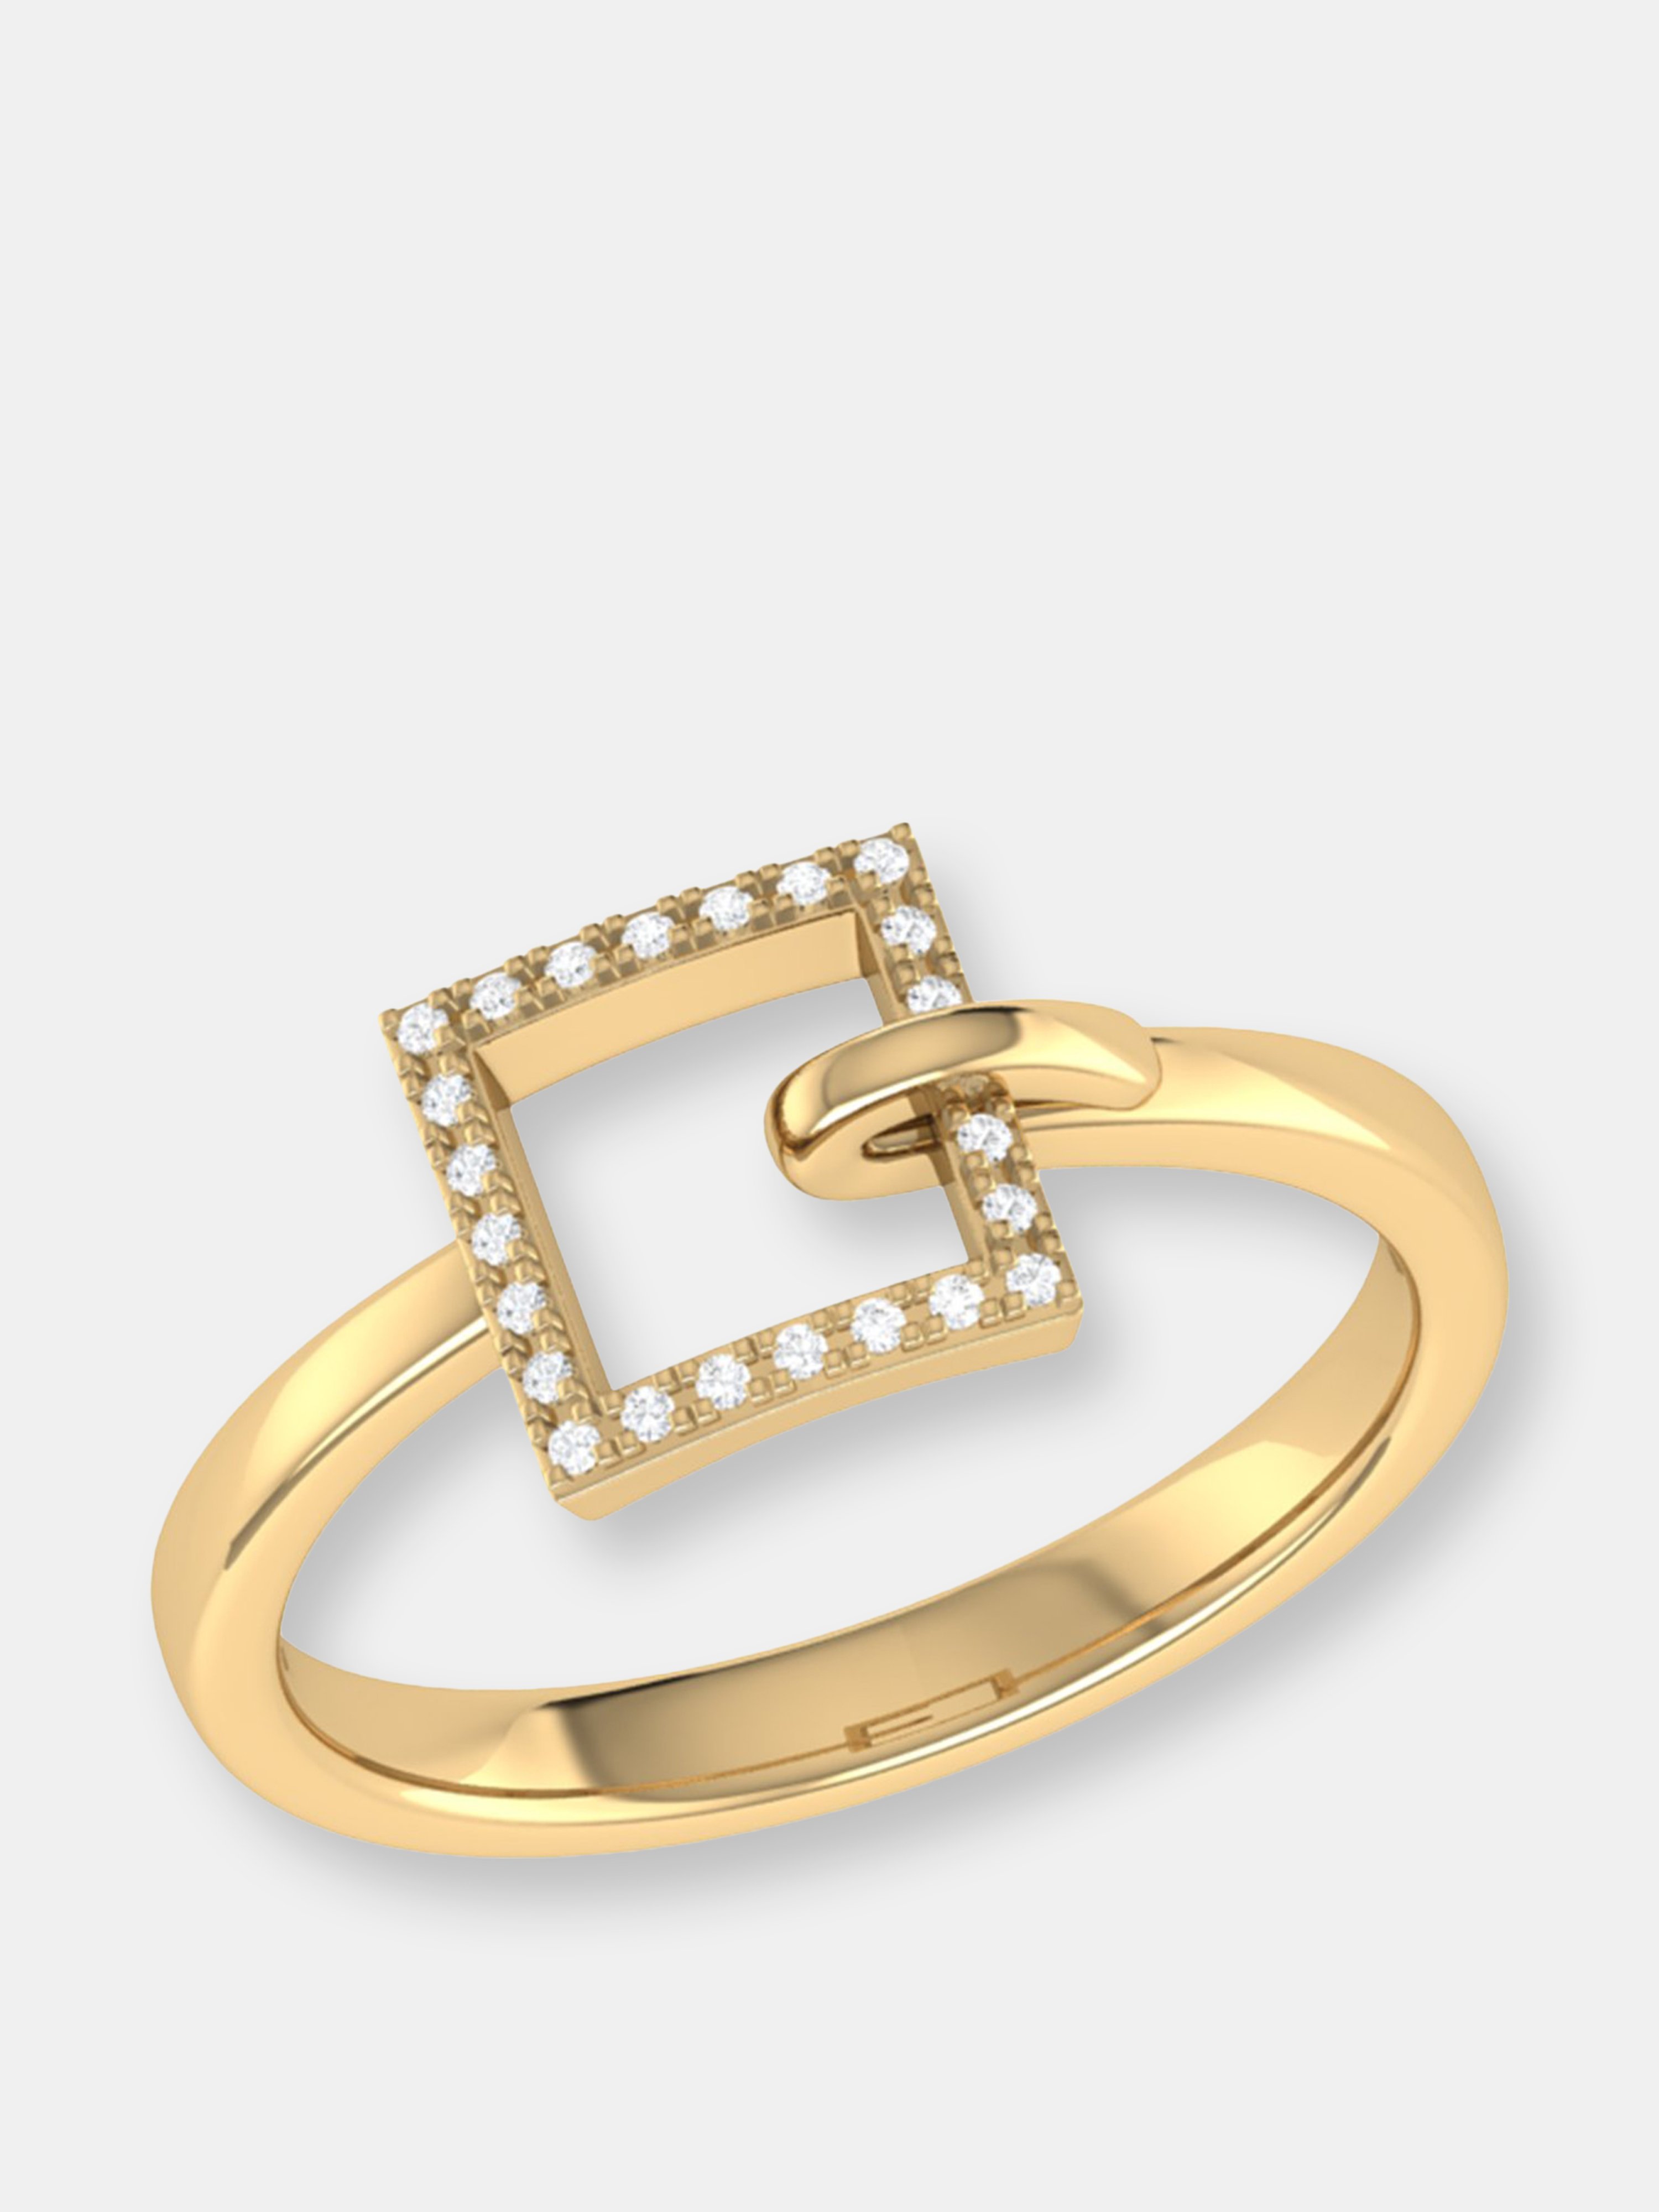 LUVMYJEWELRY LUVMYJEWELRY ON THE BLOCK SQUARE DIAMOND RING IN STERLING SILVER IN 14K YELLOW GOLD VERMEIL ON STERL